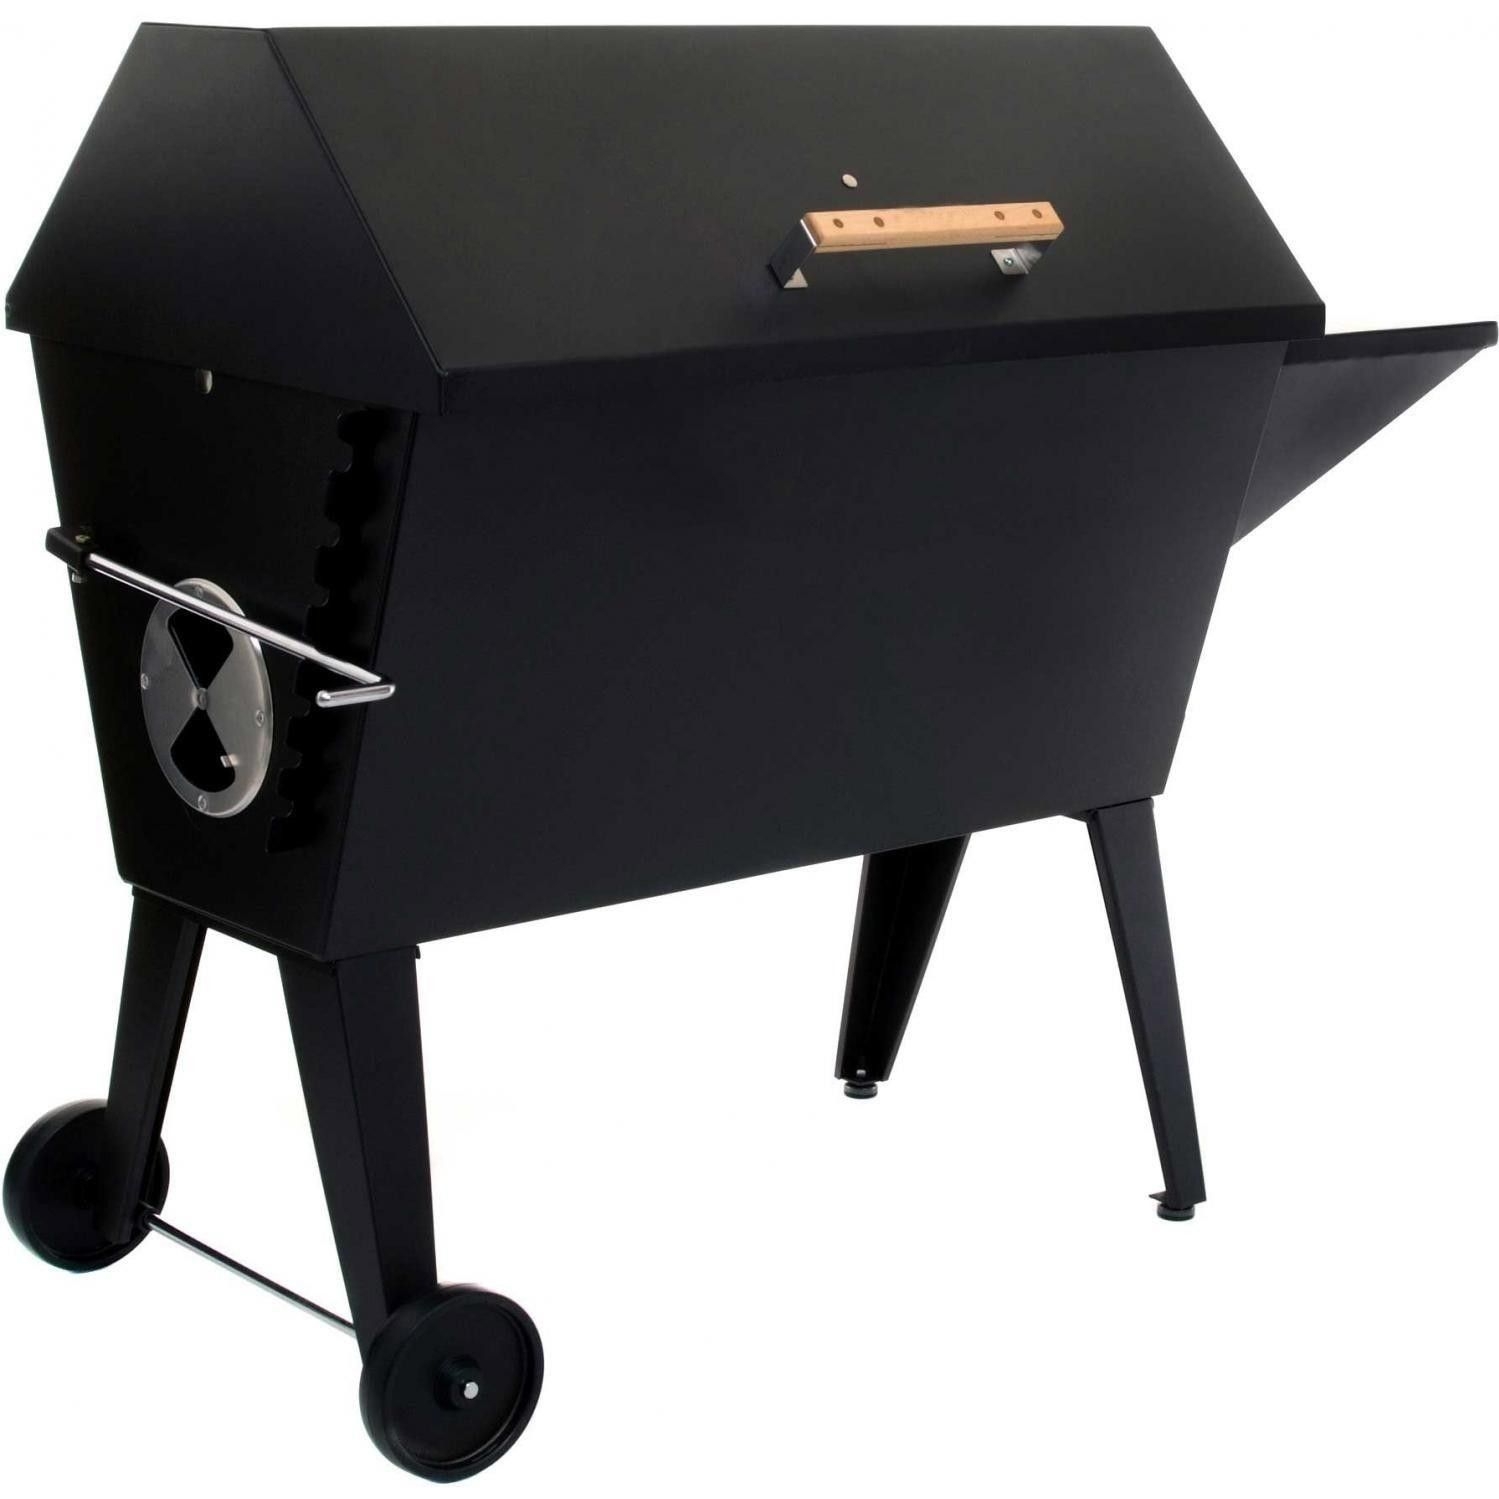 Large charcoal barbecue grills 3